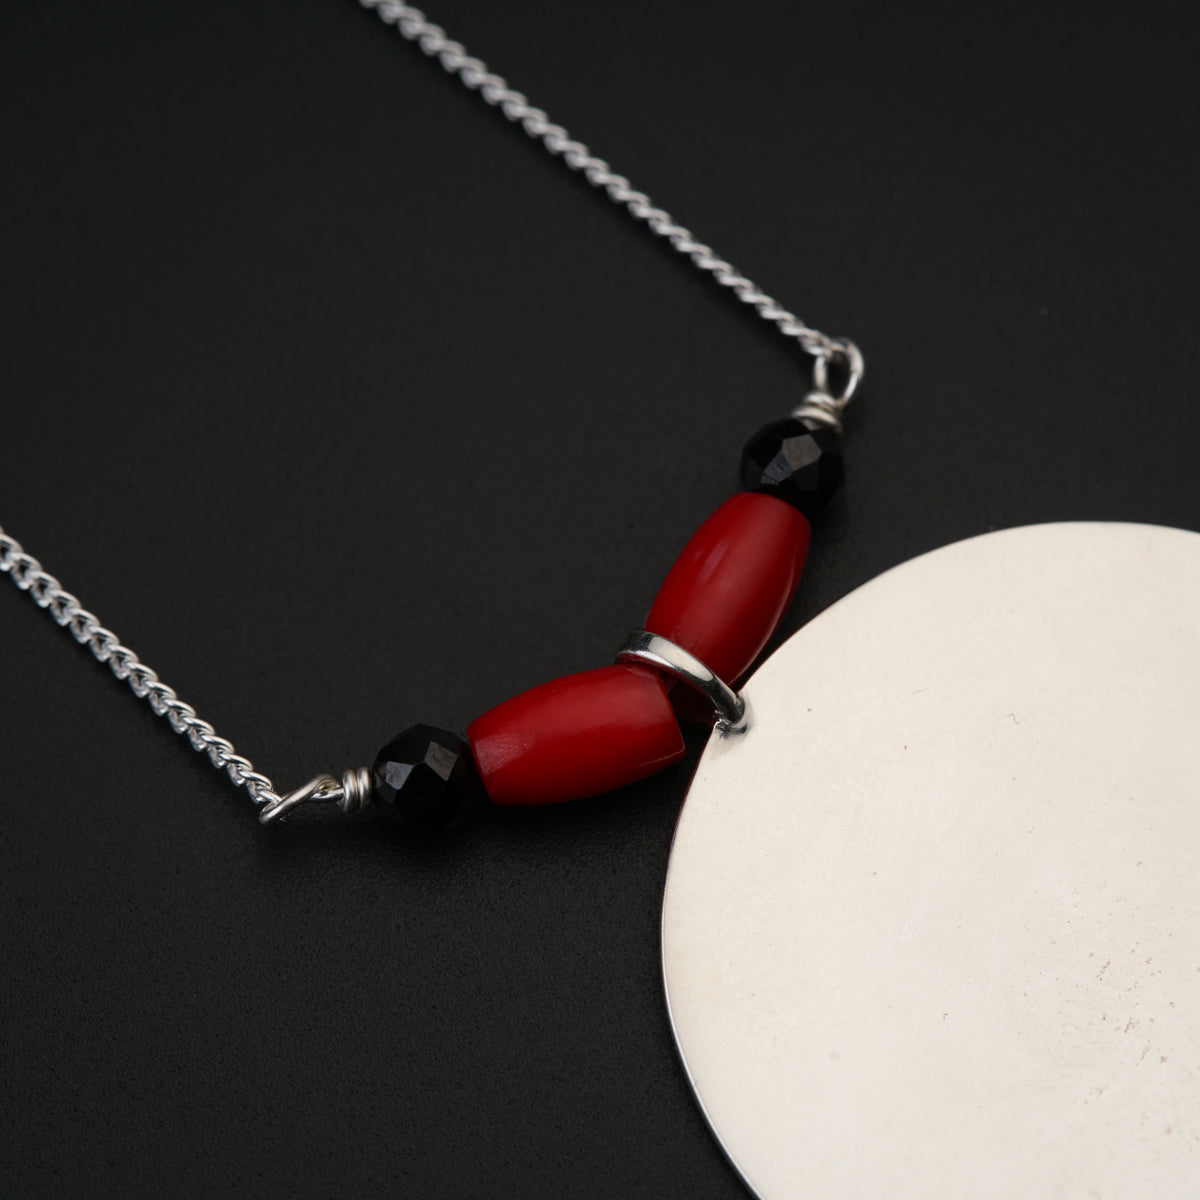 a necklace with a red bead and black beads